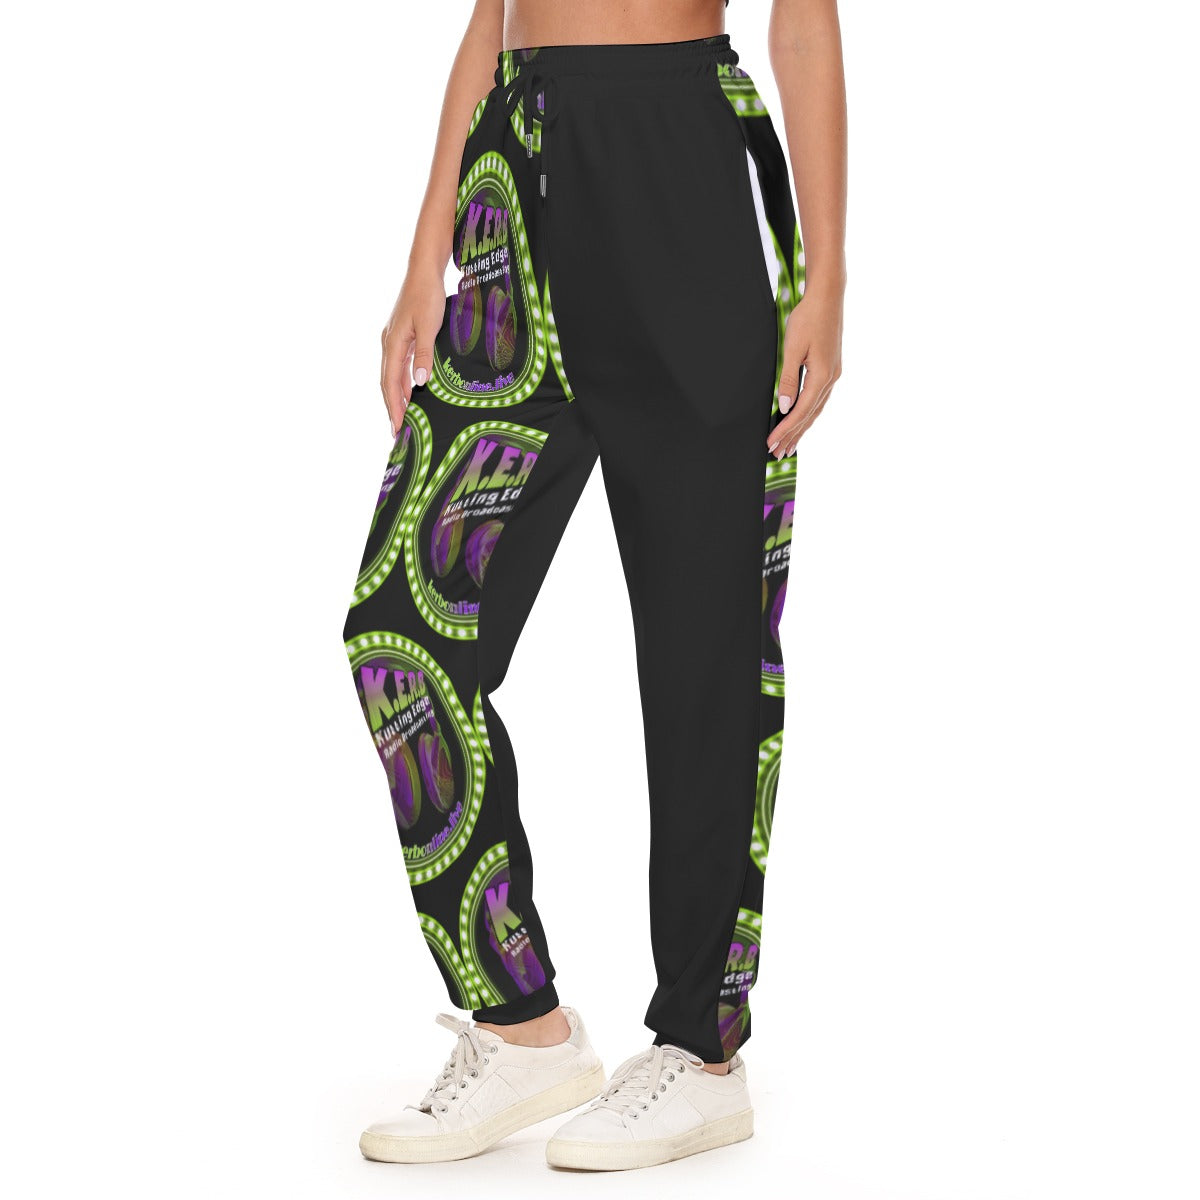 KERB Purple and Lime Logo Women's Casual Pants